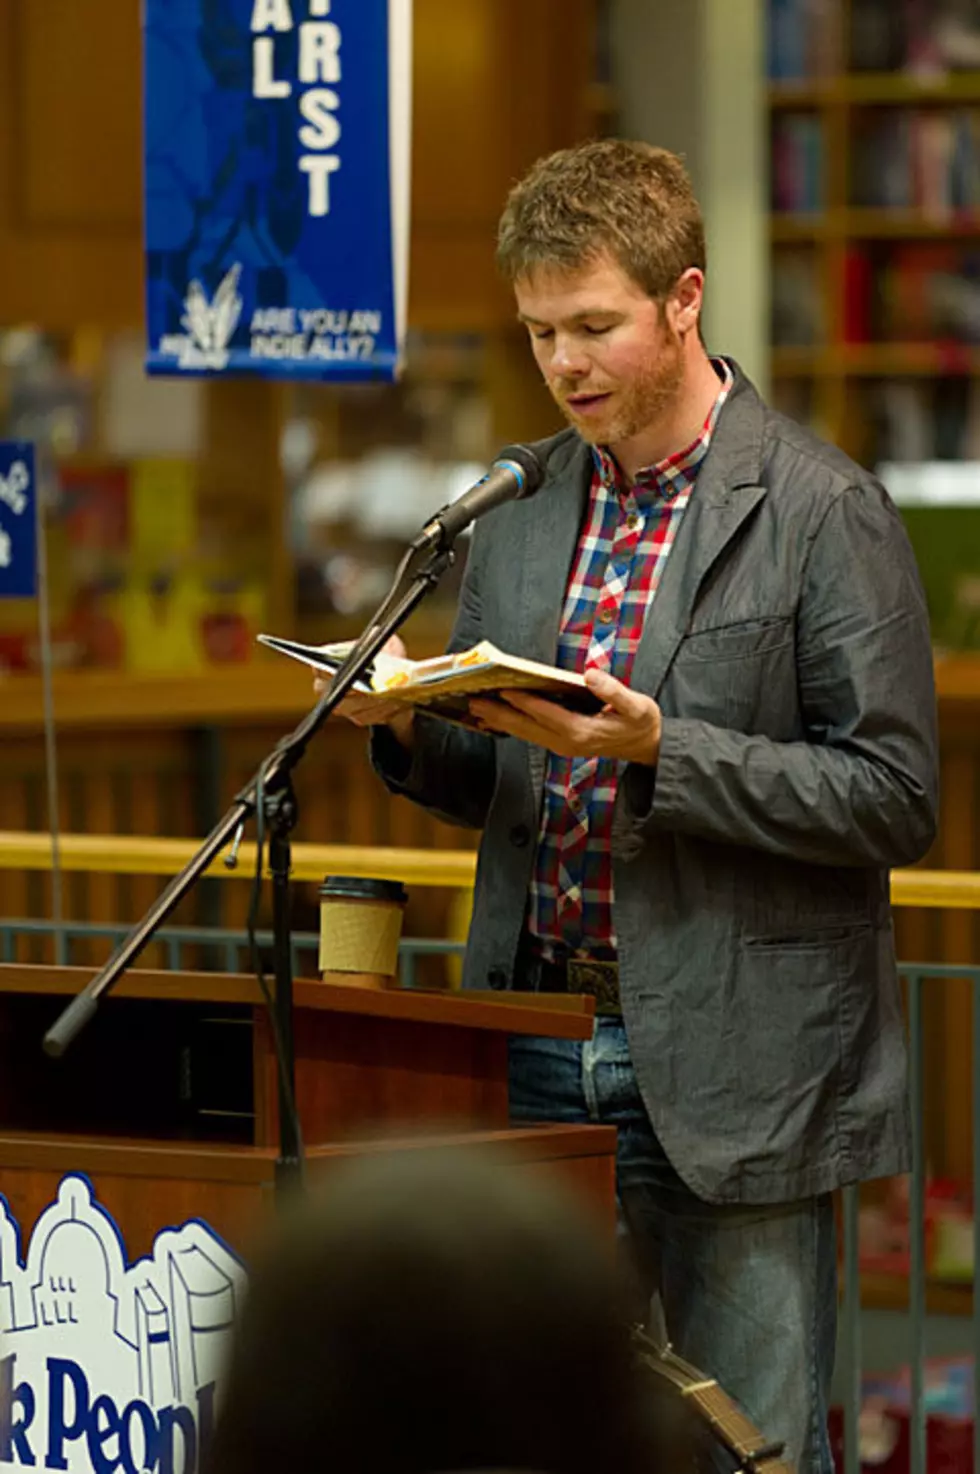 Josh Ritter read and performed at BookPeople (pics, videos)